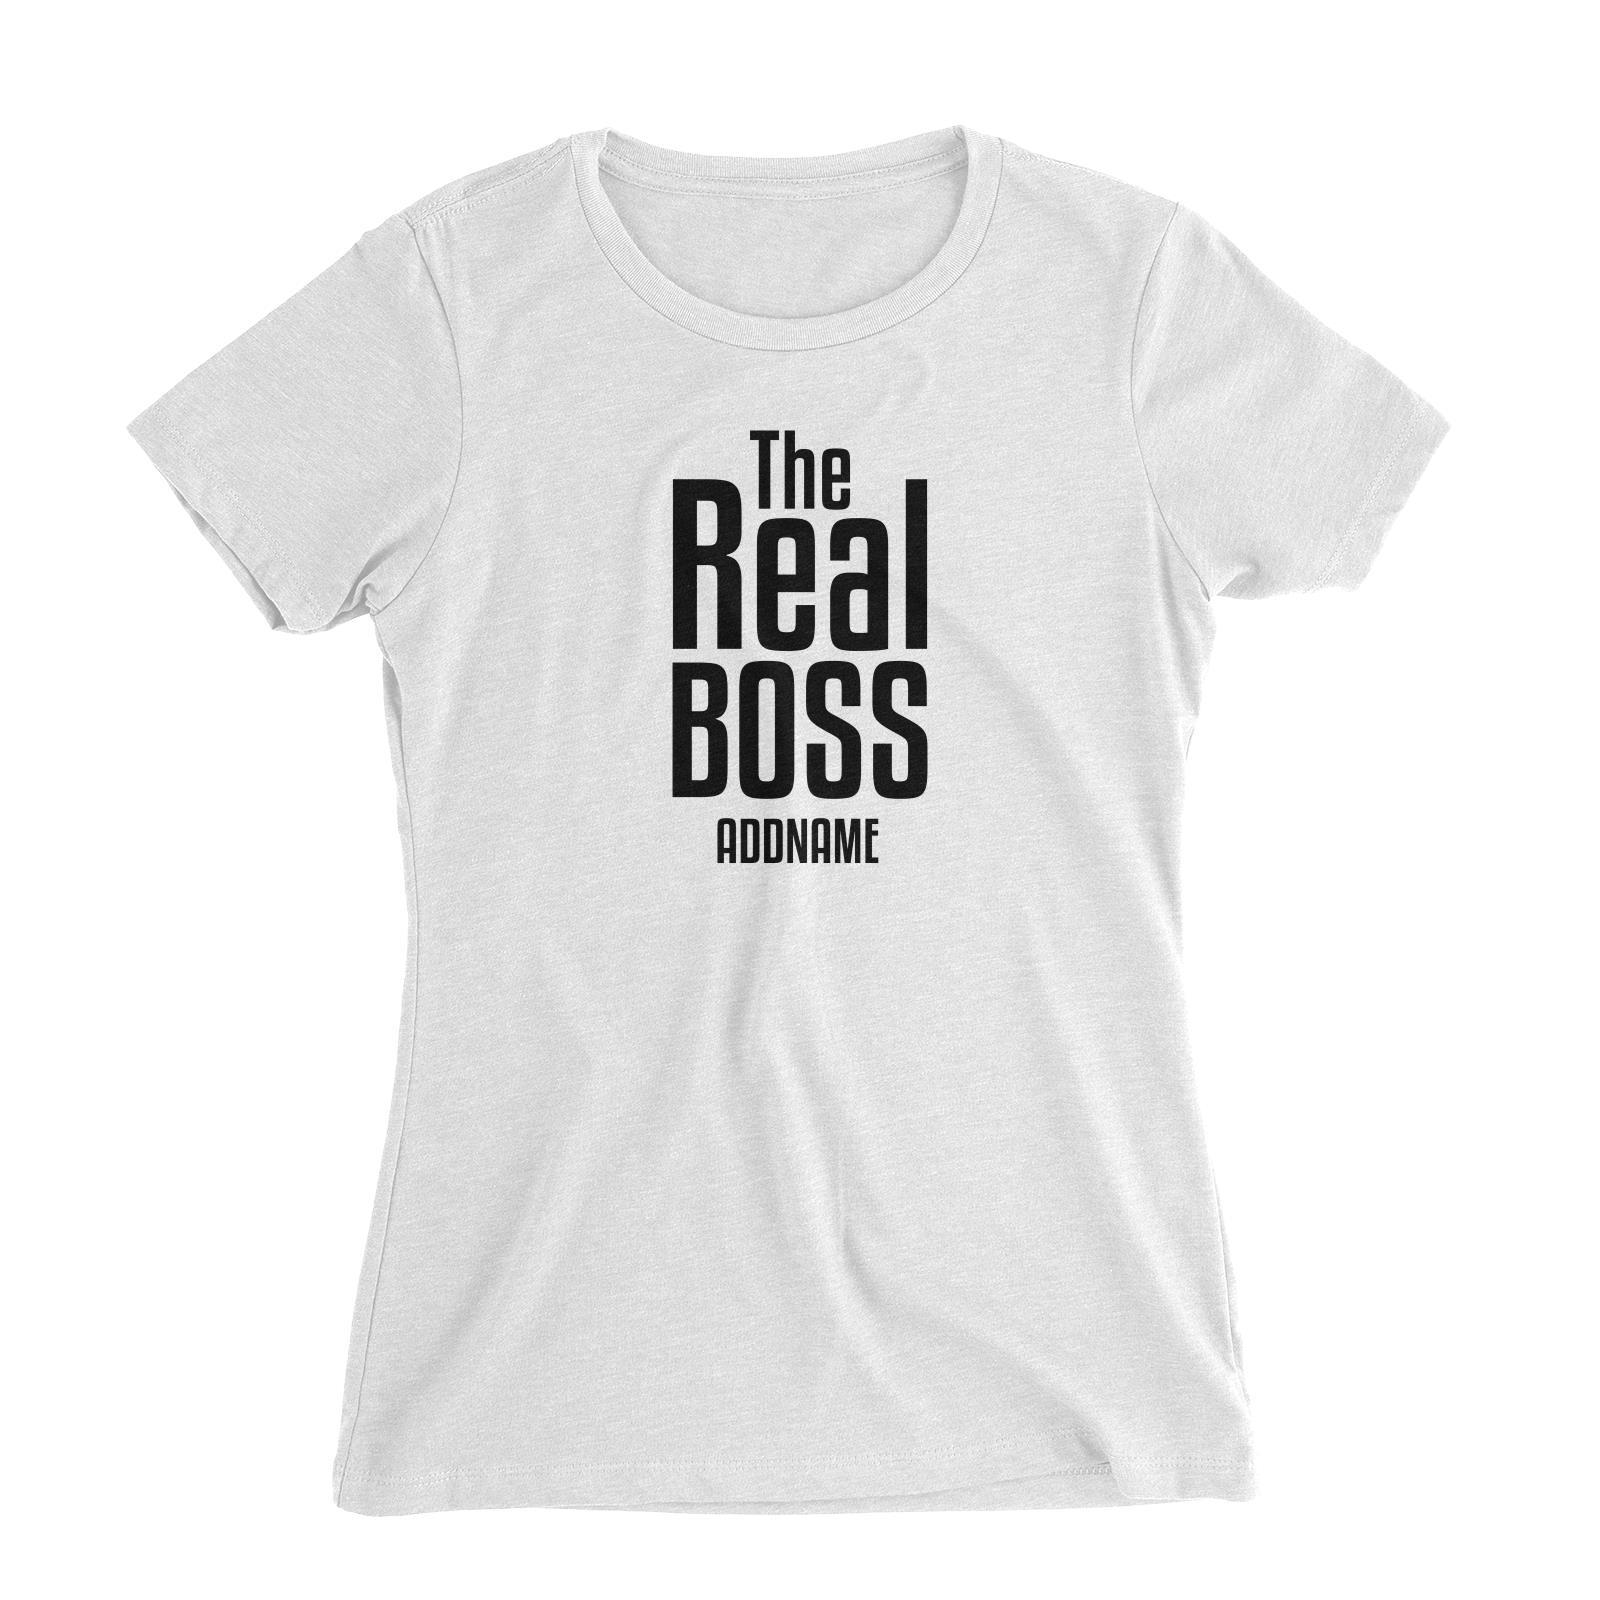 The Real Boss Women's Slim Fit T-Shirt